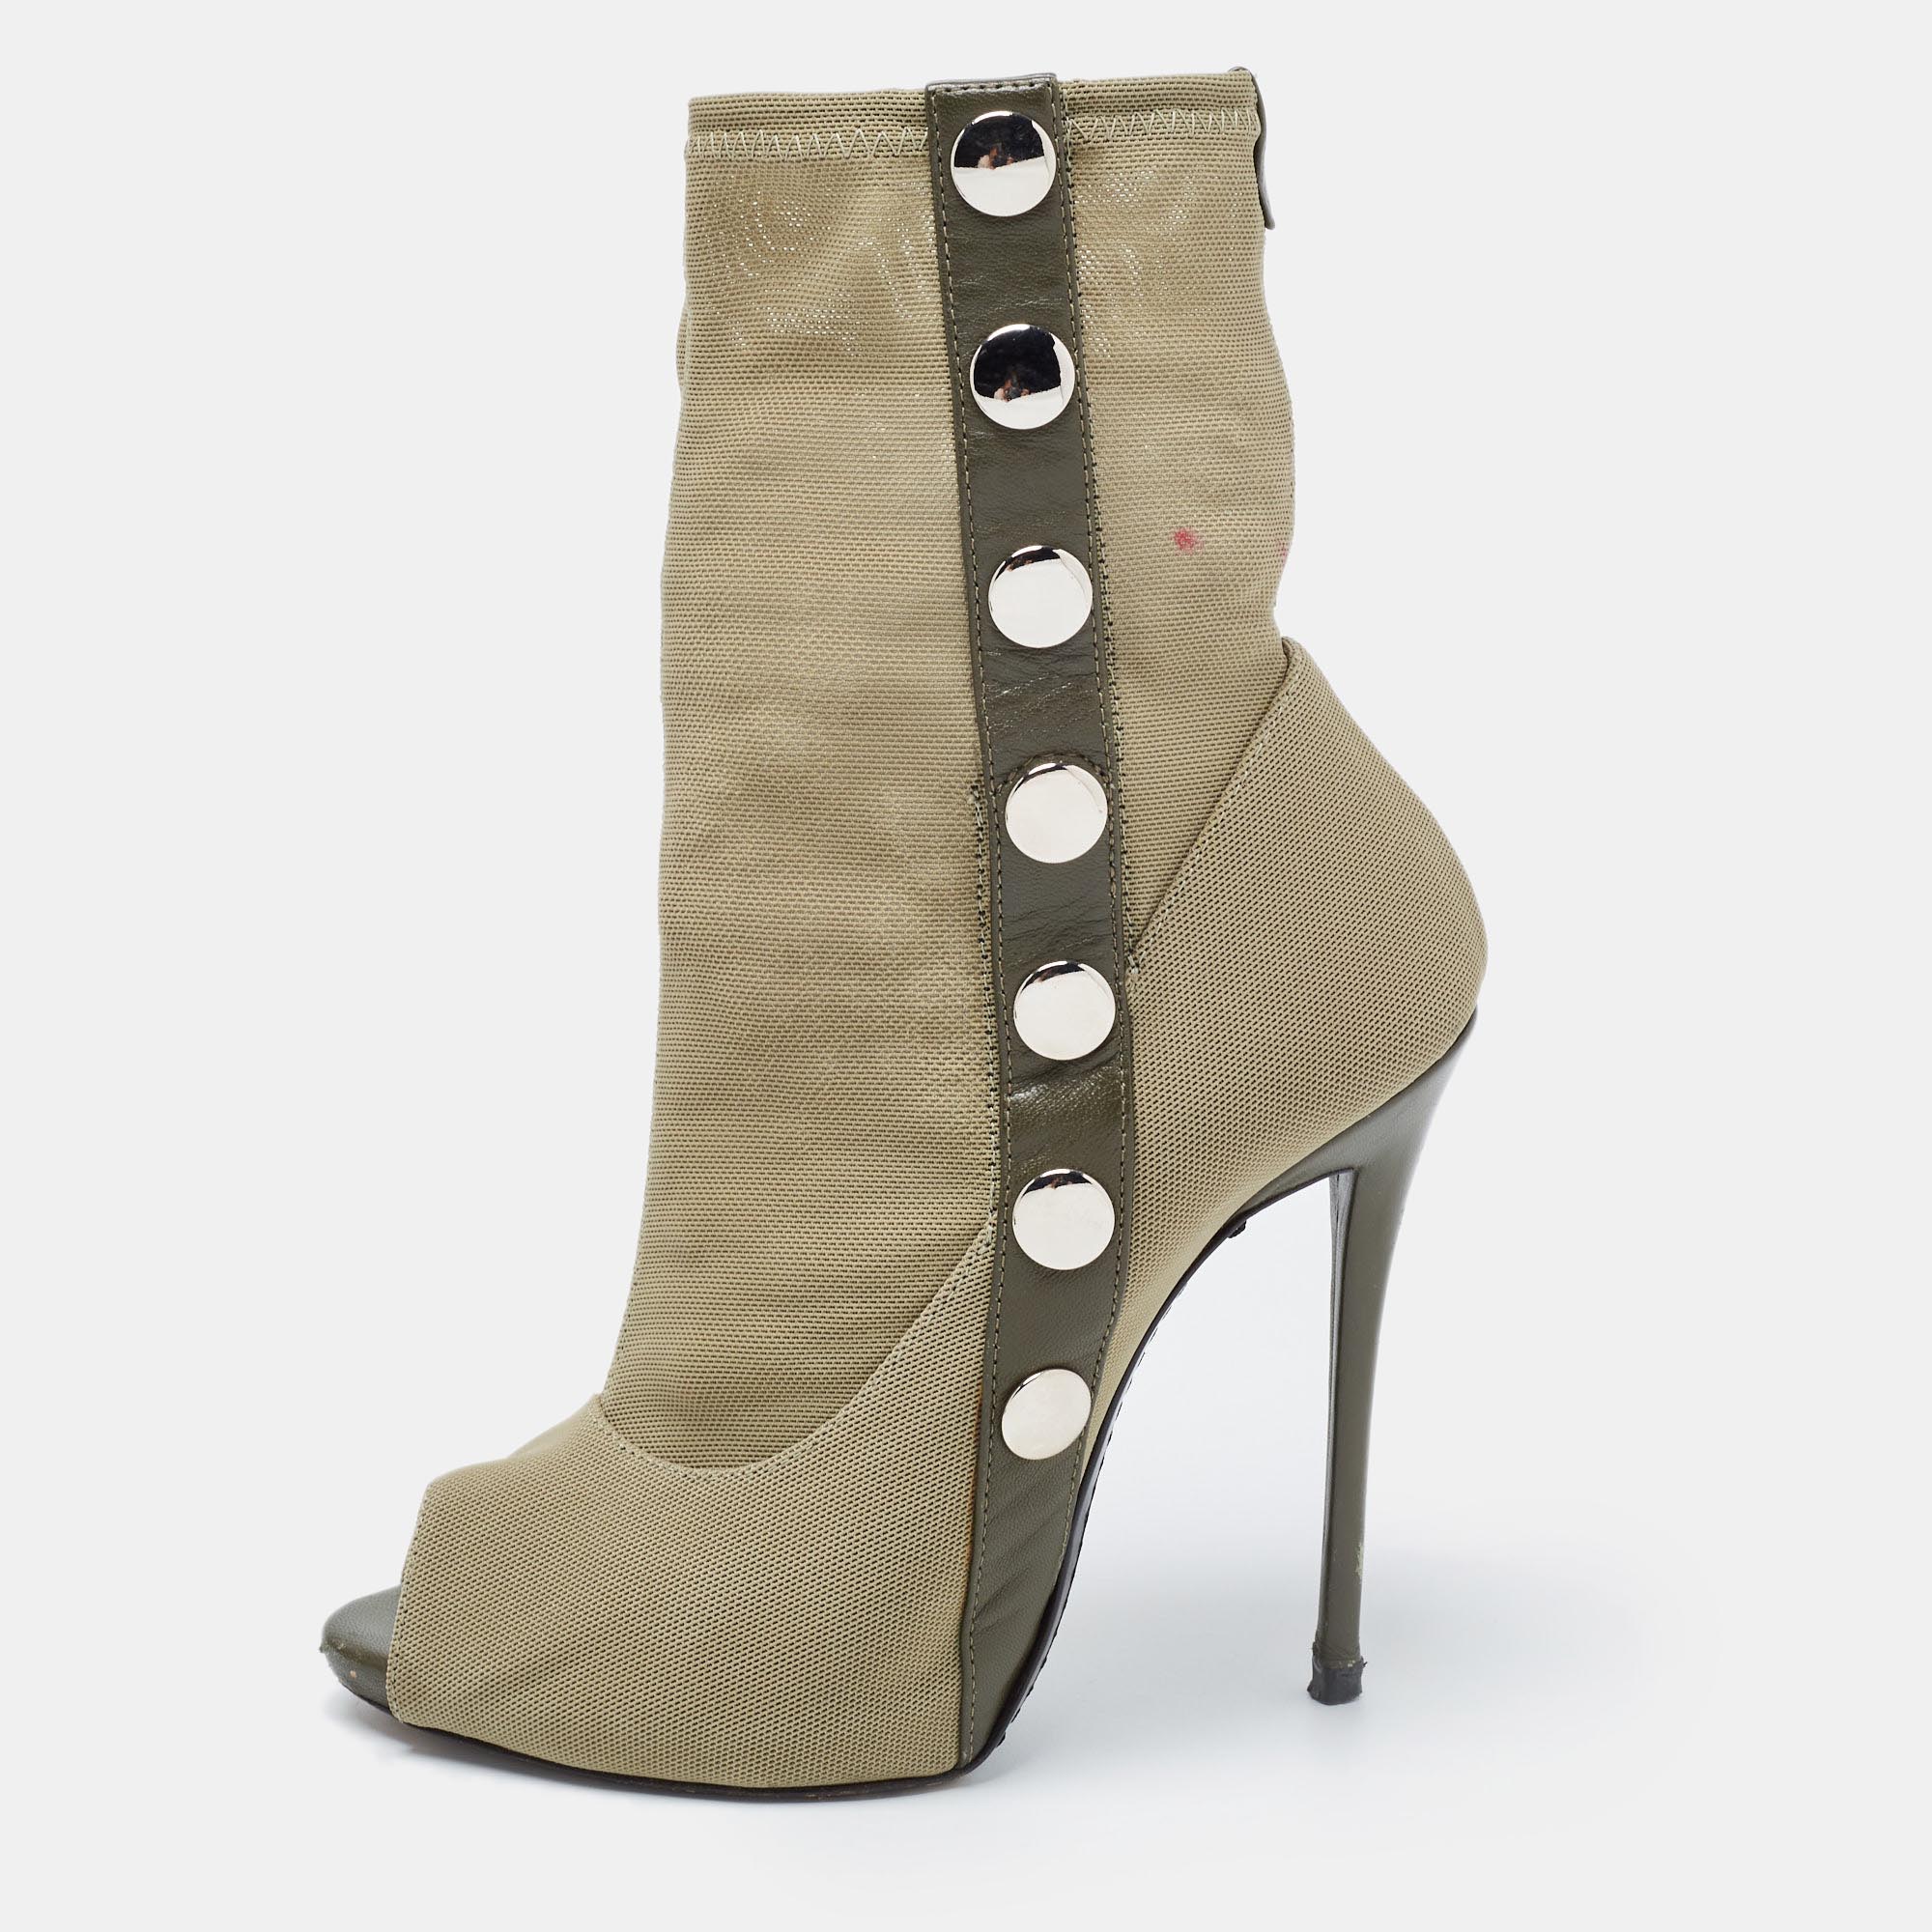 Pre-owned Giuseppe Zanotti Olive Green Mesh And Studded Leather Peep Toe Booties Size 37